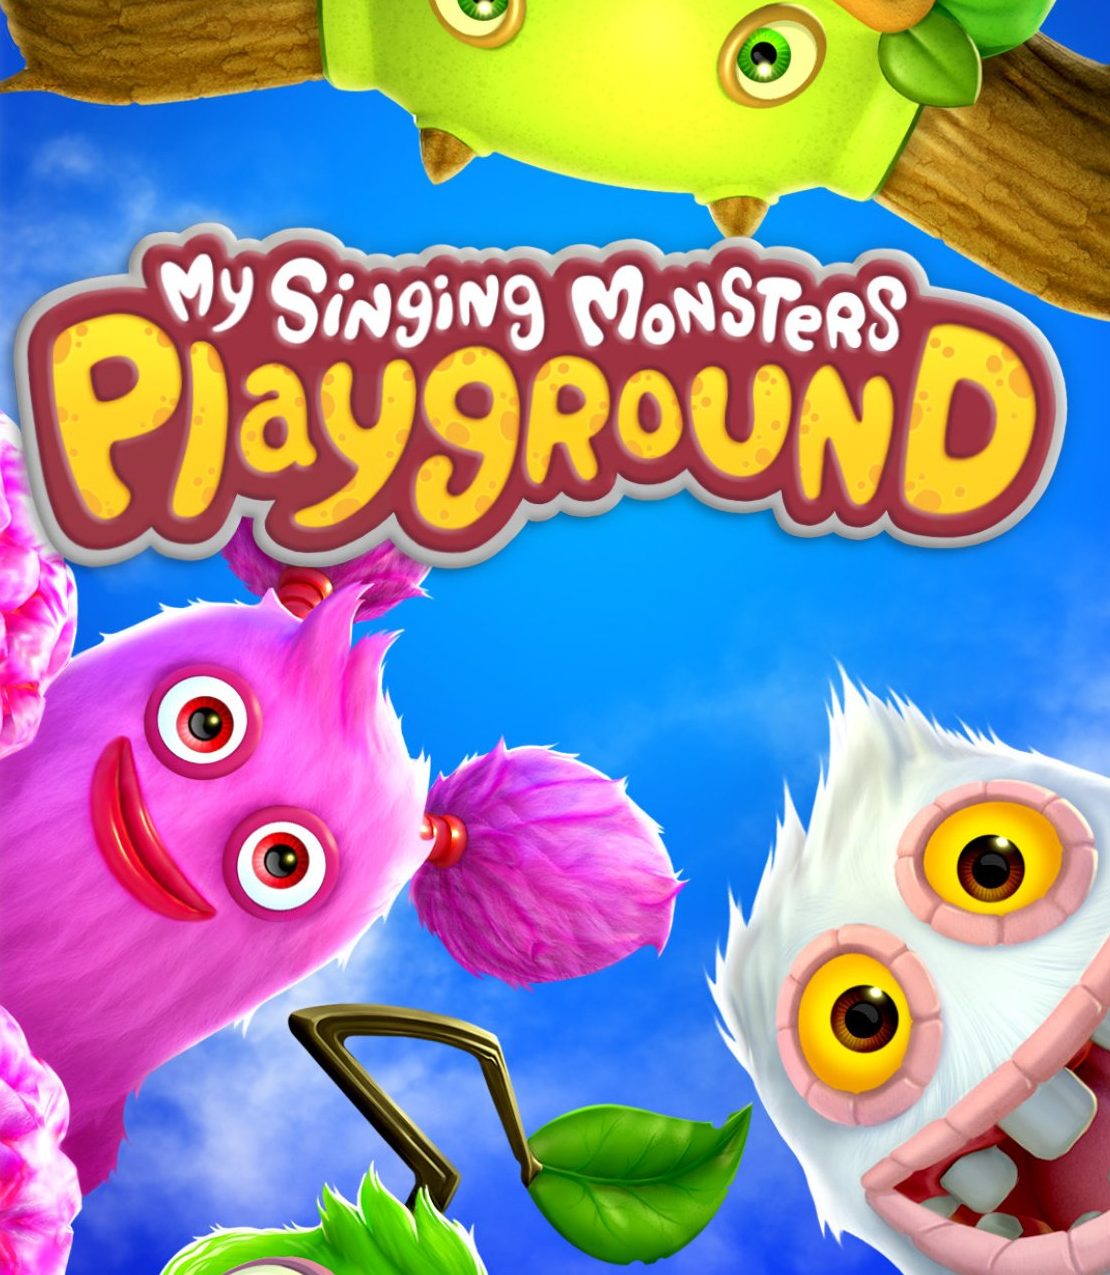 My Singing Monsters Playground in arrivo su console